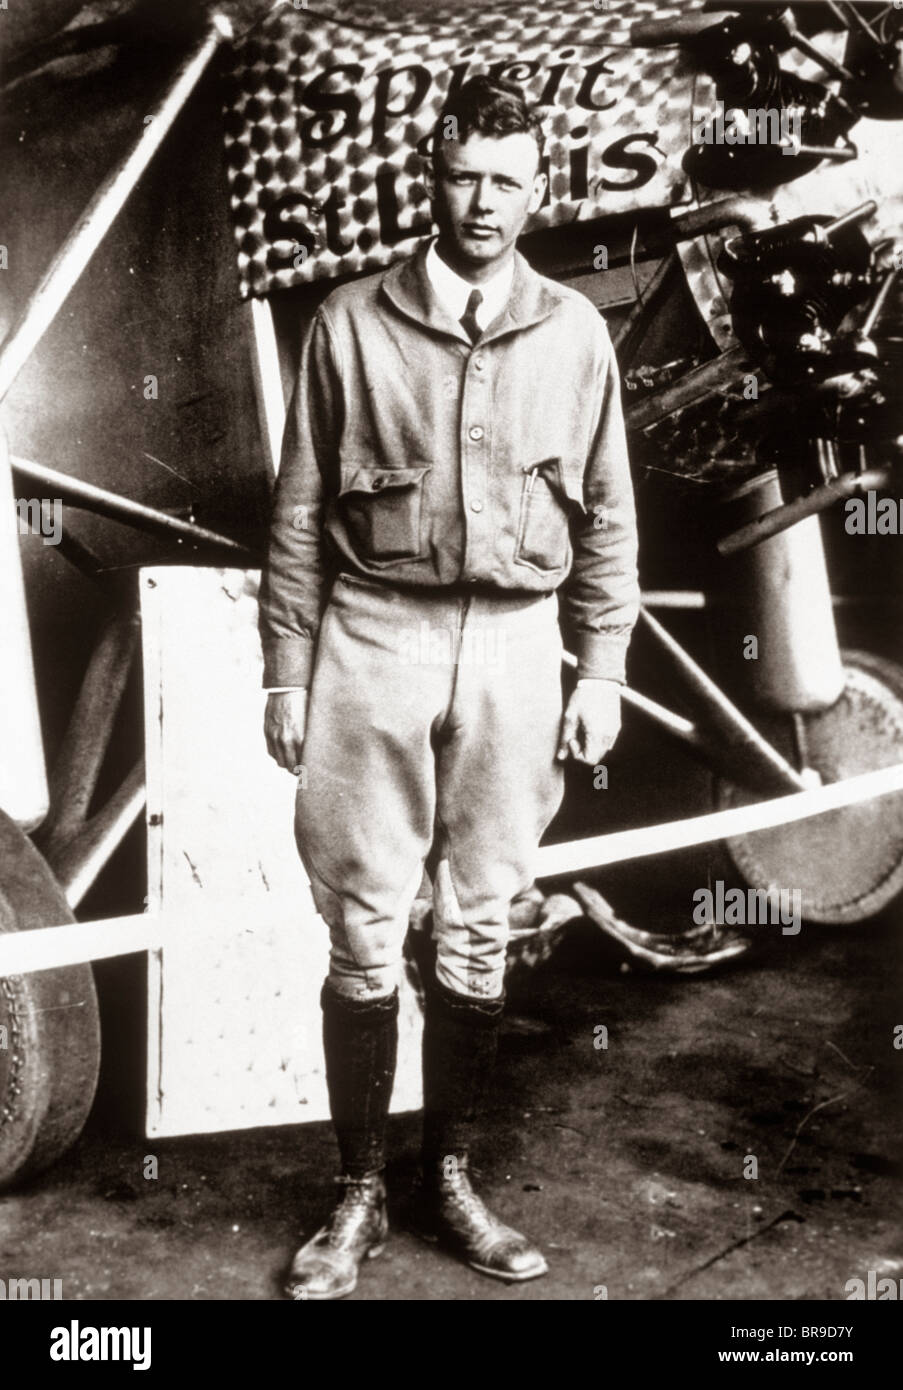 1920s 1927 PORTRAIT OF AVIATOR PILOT CHARLES LINDBERGH STANDING BY PLANE SPIRIT OF ST. LOUIS Stock Photo